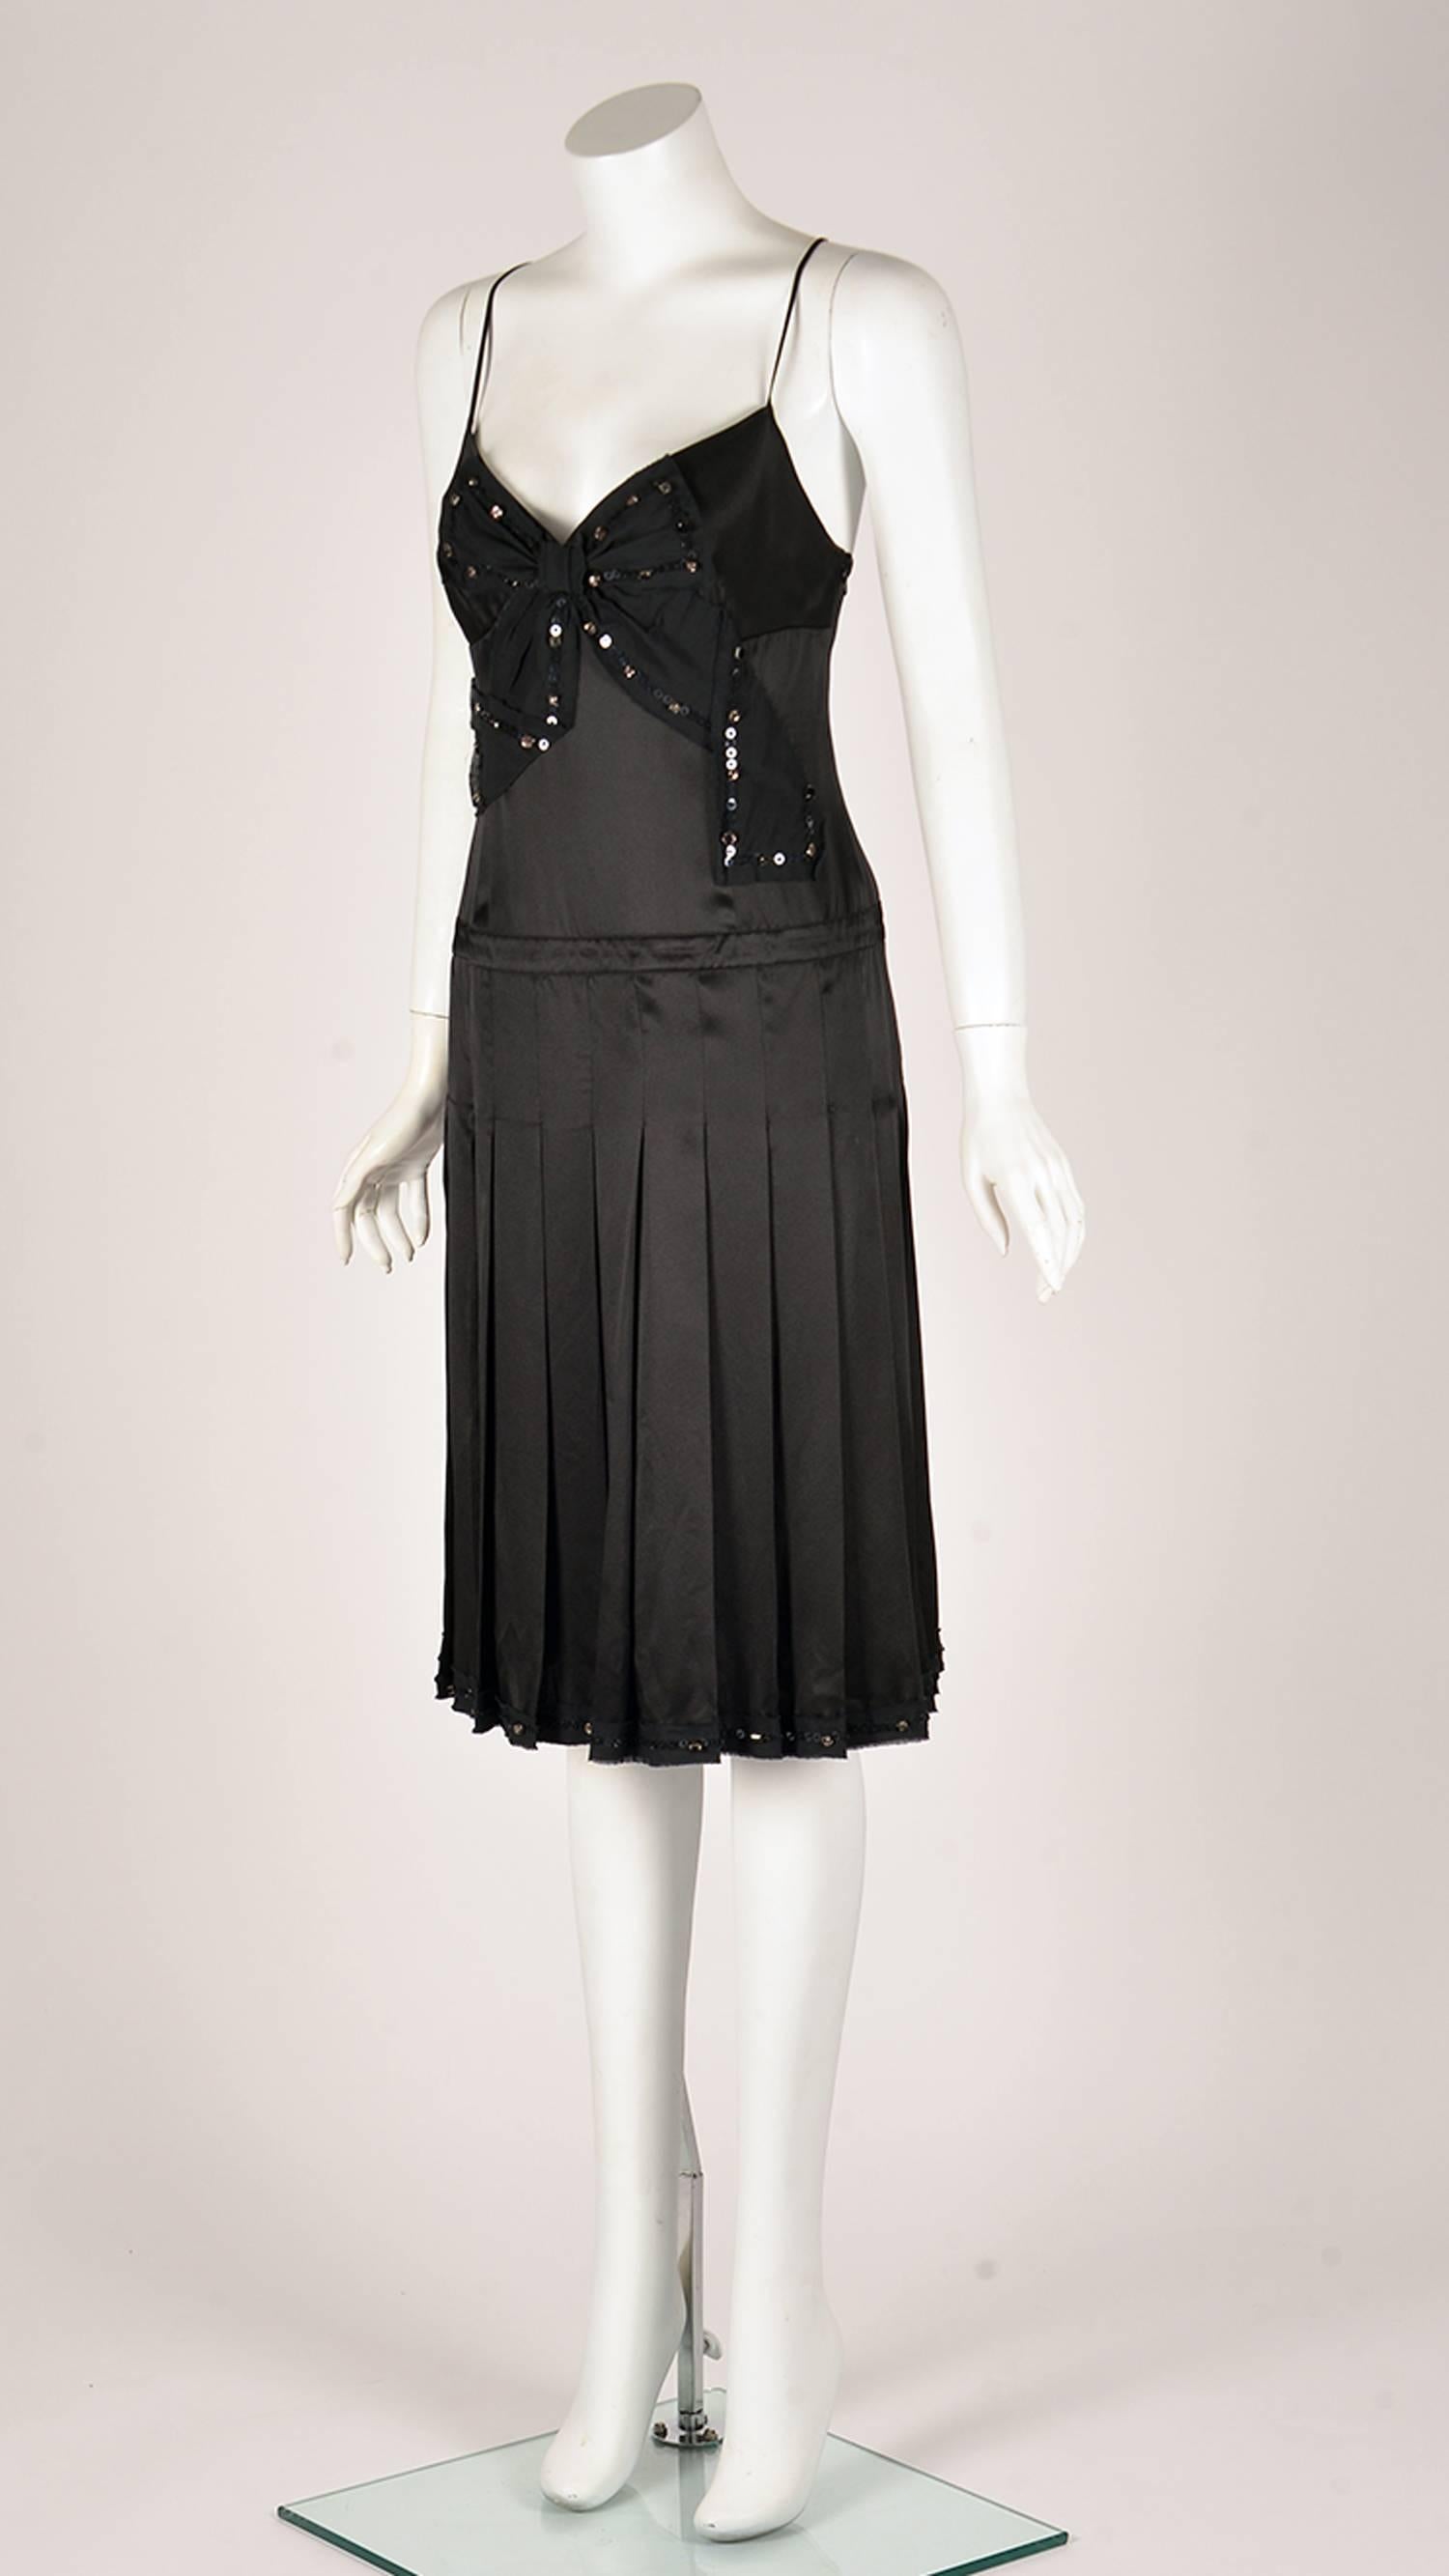 Moschino Cheap and Chic black silk spaghetti strap drop waist cocktail dress.  The dress has a black bow applique with sequin and clear rhinestone trim at center front, as well as a gently pleated skirt. The dress has a size zipper closure. 